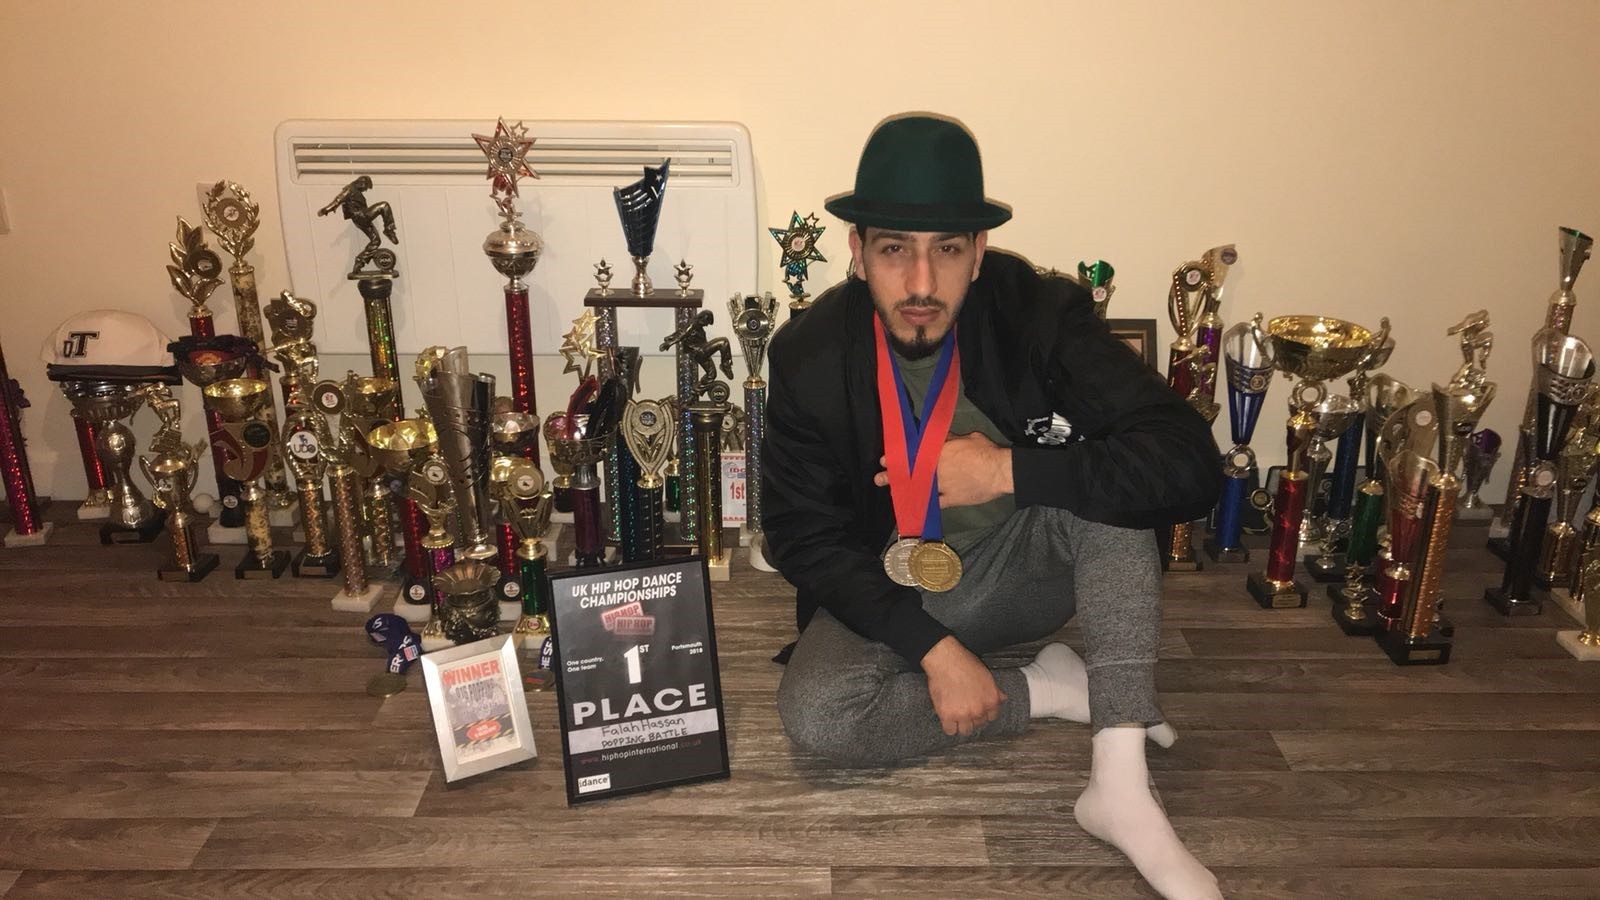 HHI UK: Poppin’ Ron picks up gold in hip hop dance competition